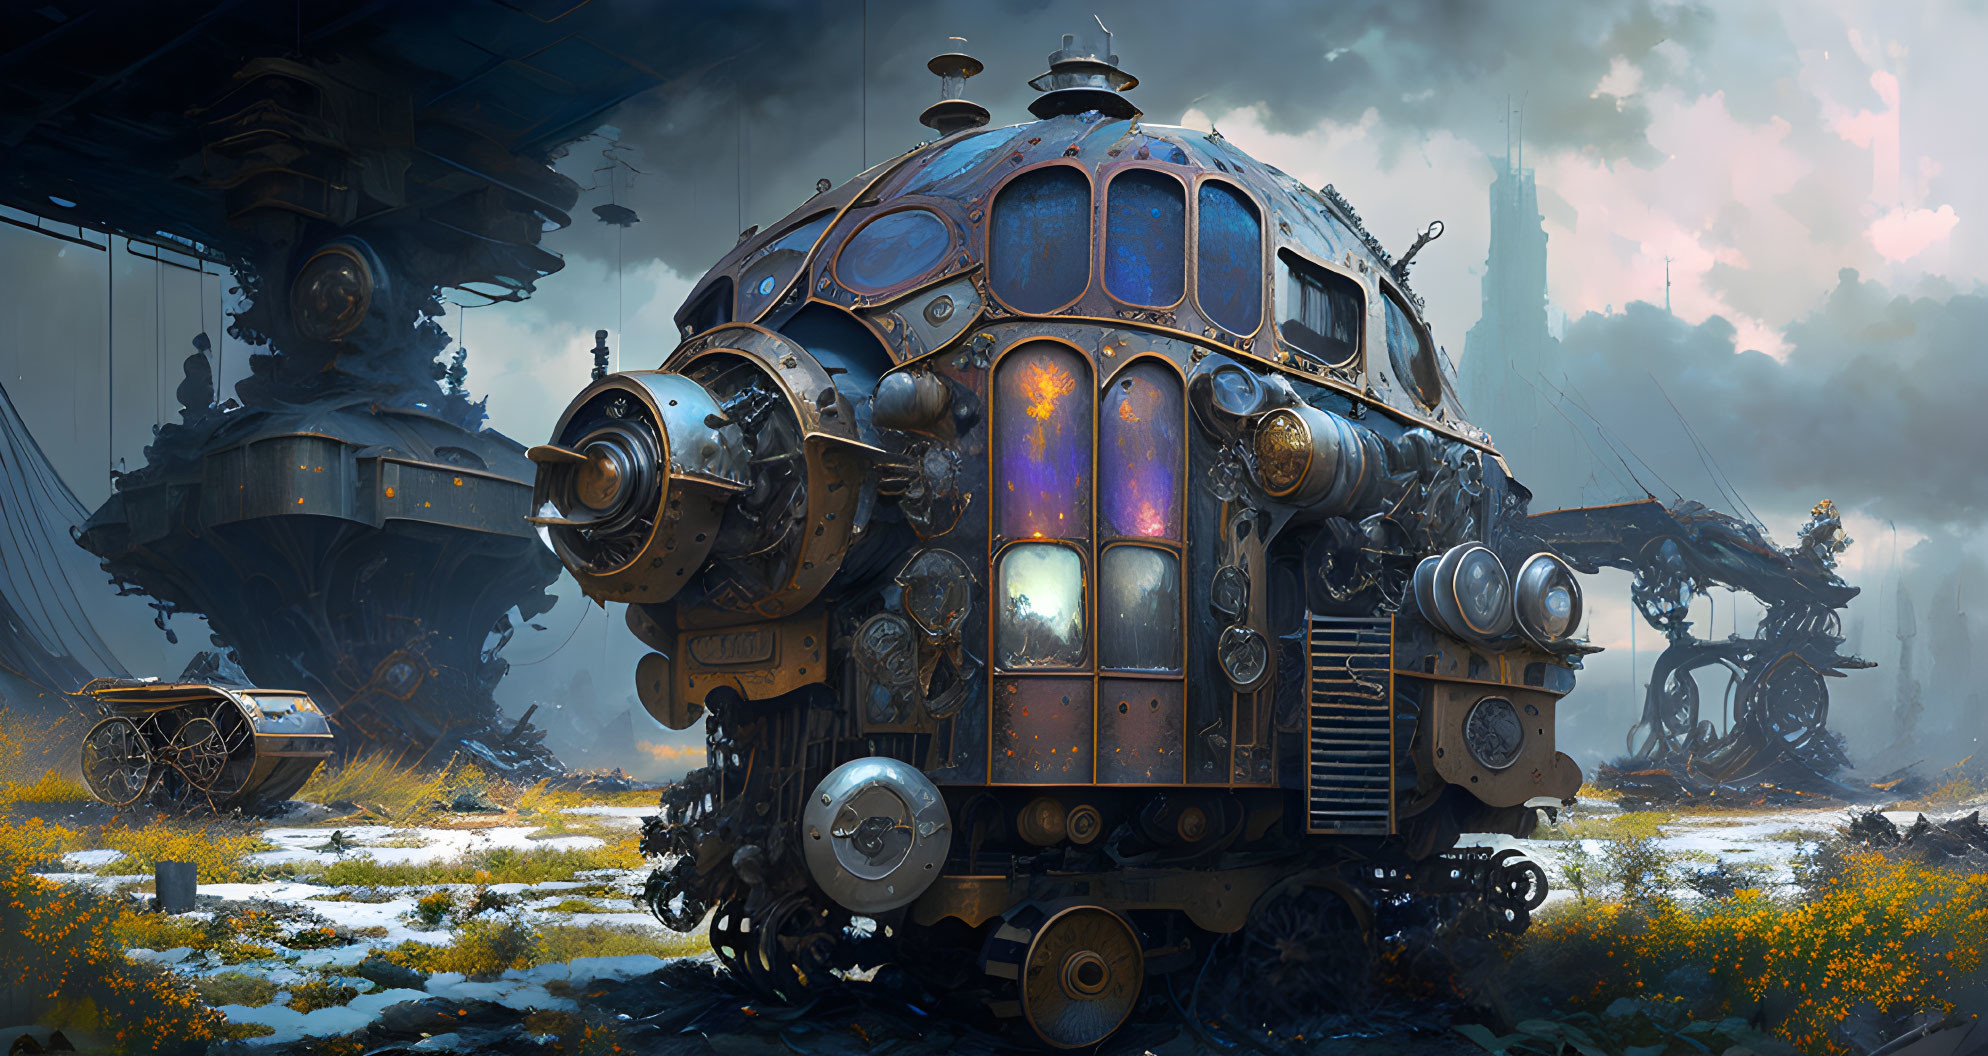 Detailed Steampunk Style Illustration of Spherical Riveted Vehicle in Futuristic Setting